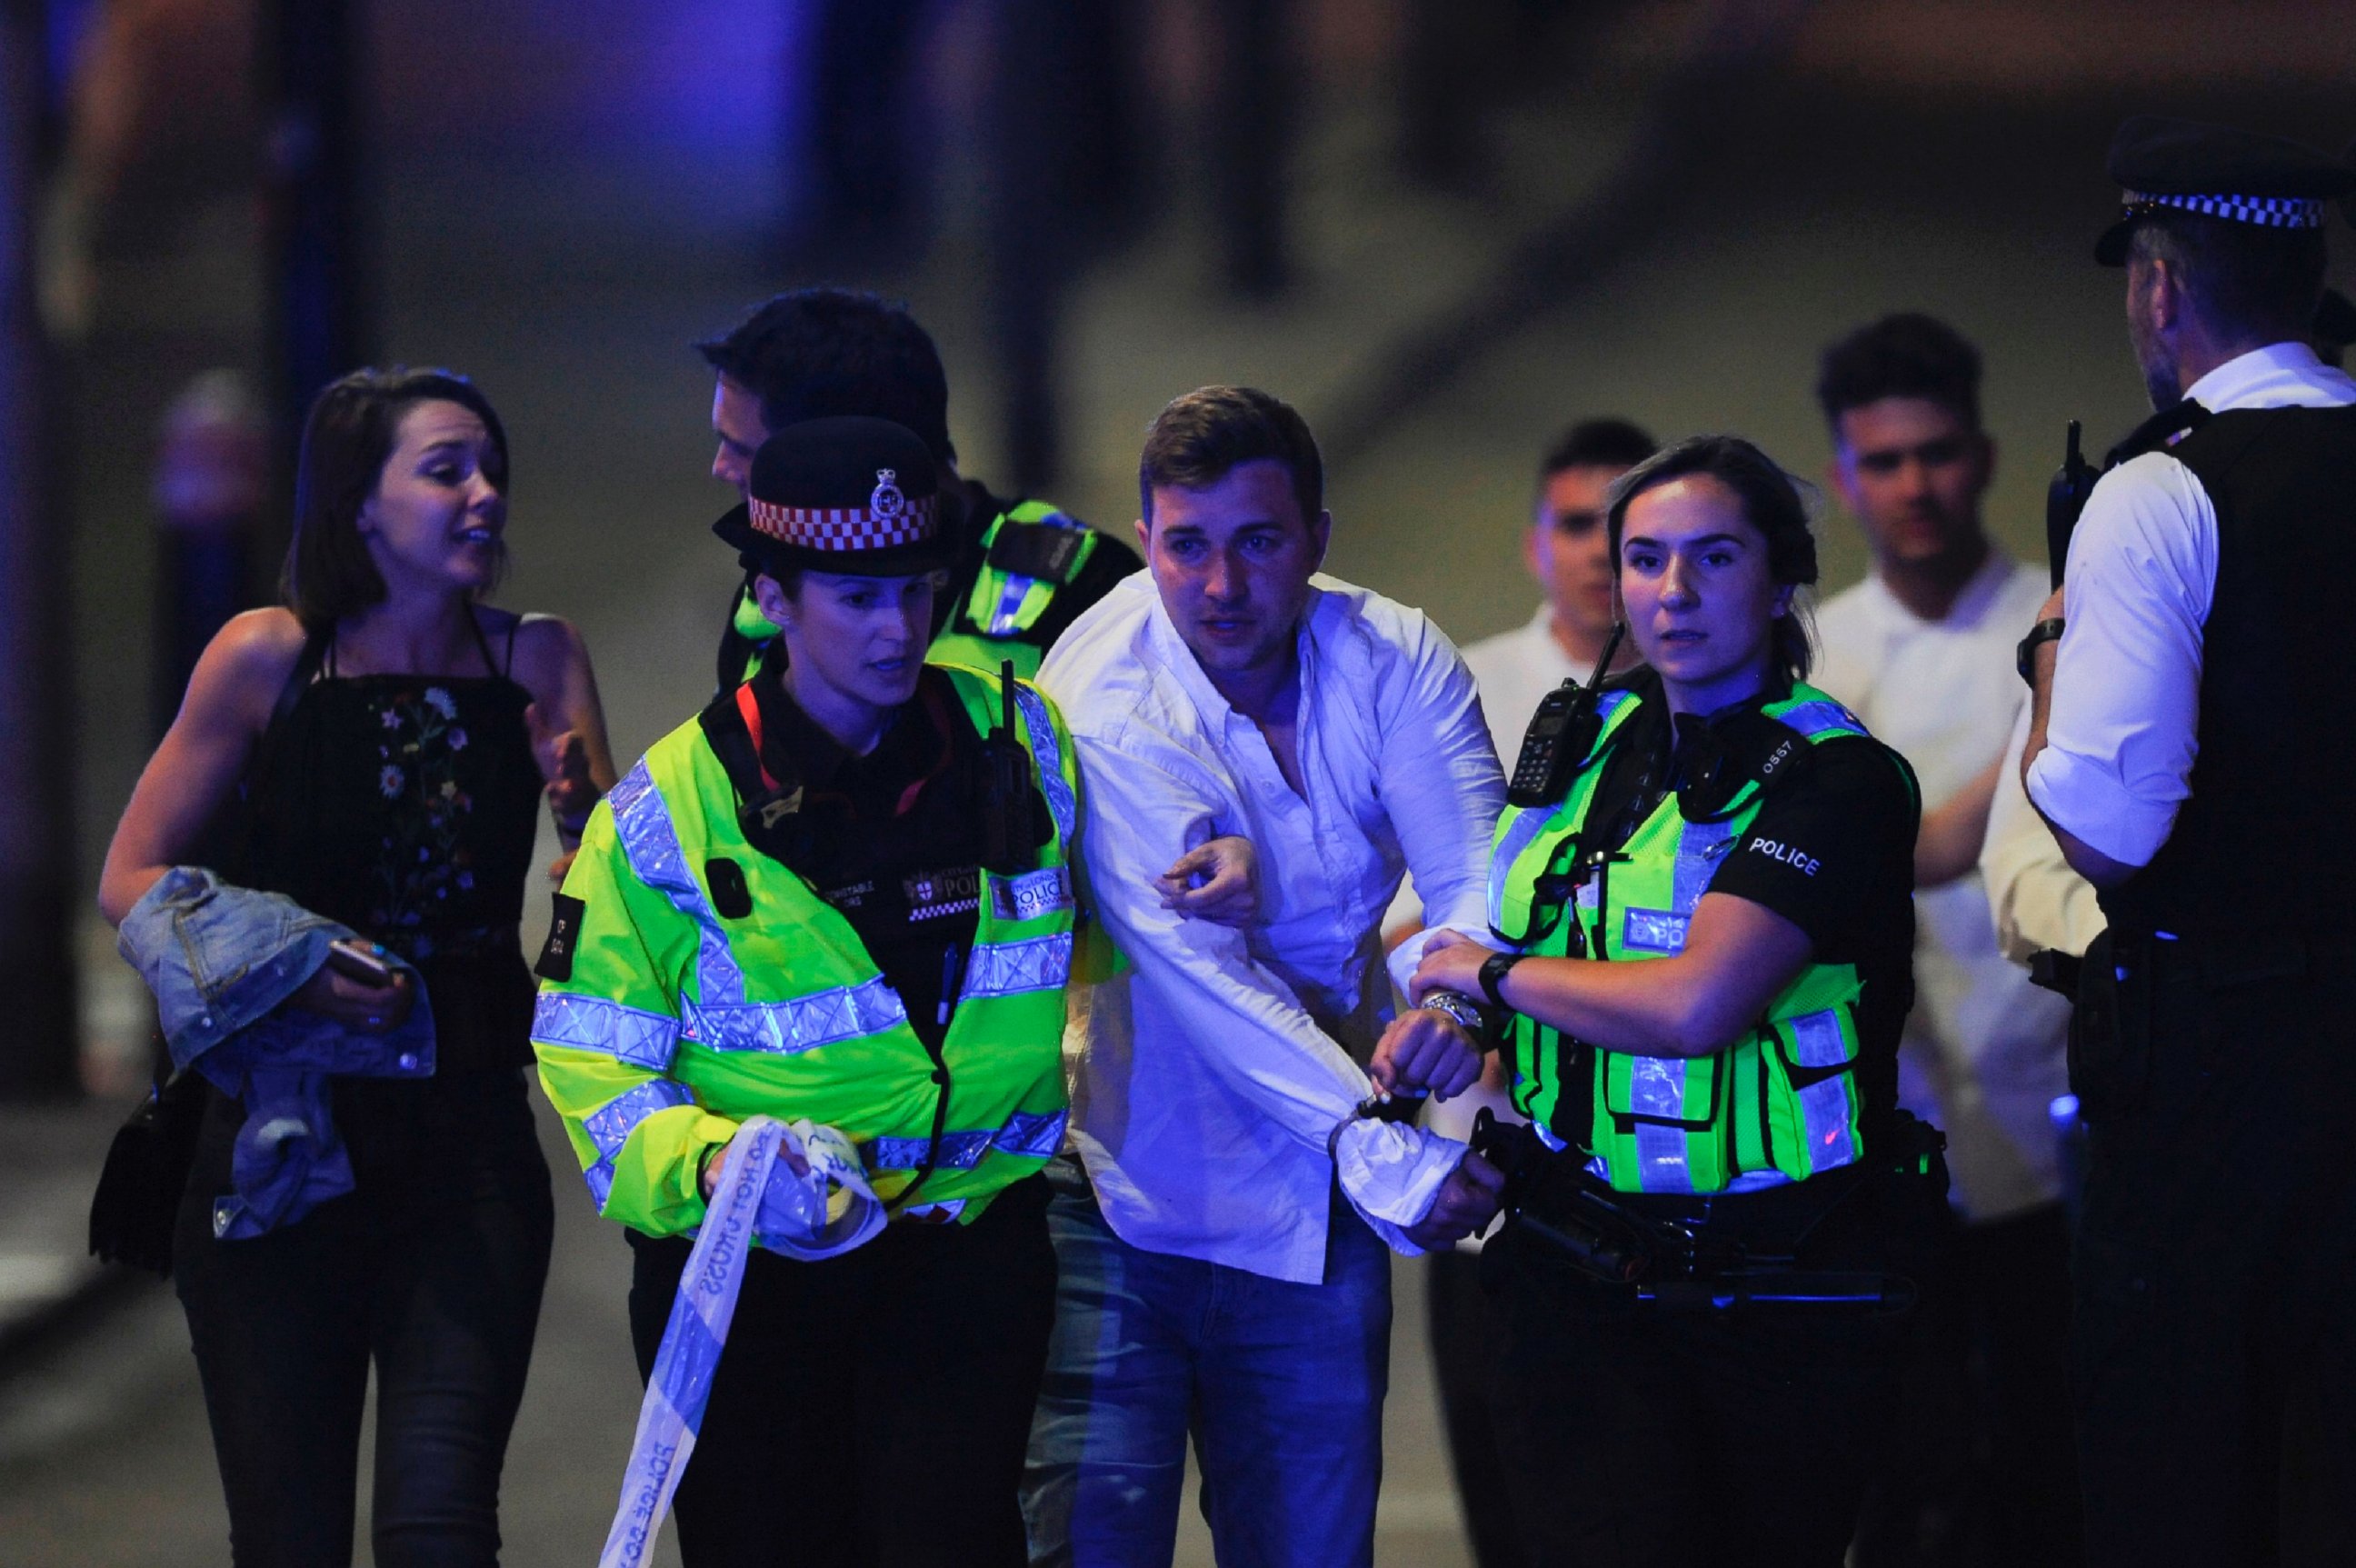 PHOTO: Police escort a member of public as they clear the scene of a terror attack on London Bridge in central London on June 3, 2017.